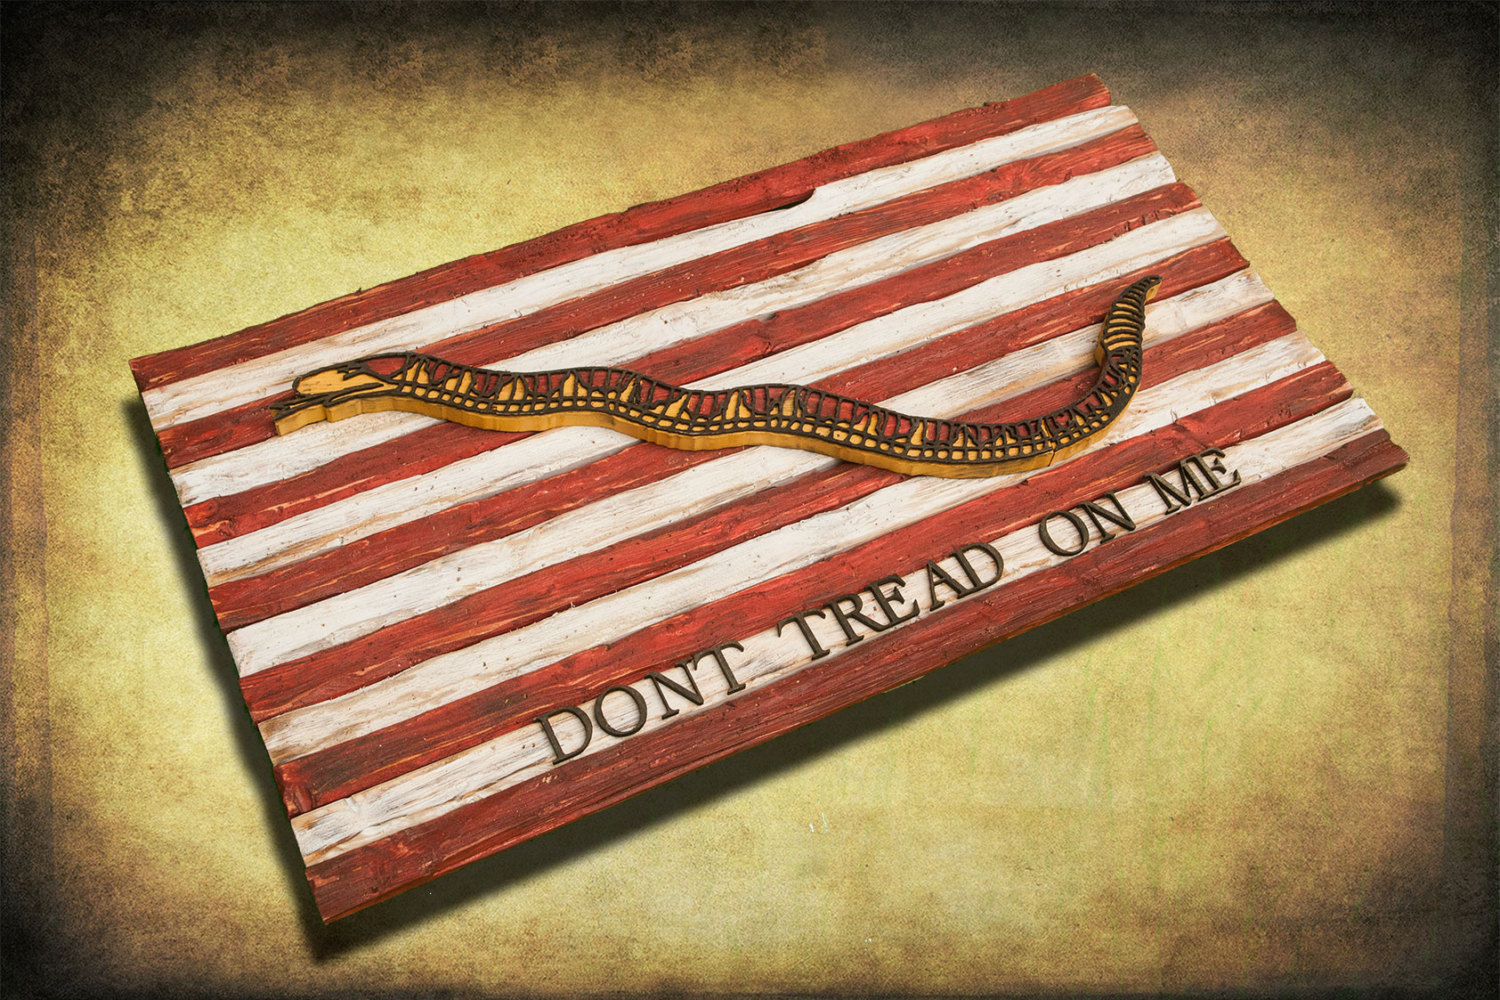 Navy Jack, Don't Tread On Me, Limited Edition, Weathered Wood One of a kind ,vintage, art, distressed, weathered, recycled, snake, yellow